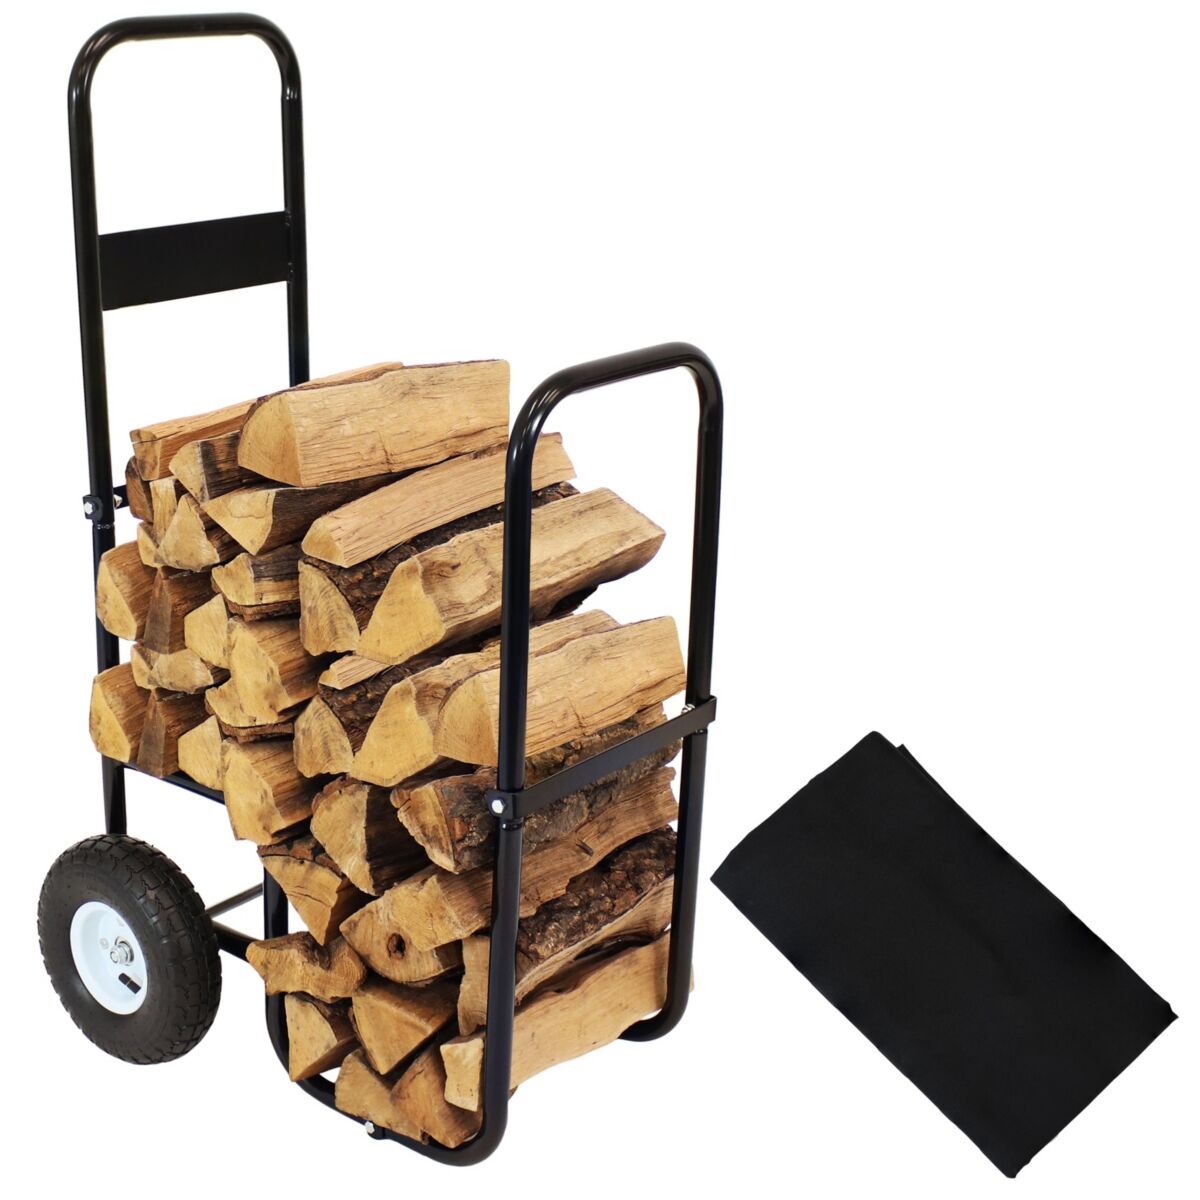 Sunnydaze Decor Steel Log Cart Carrier and Storage Rack with Wheels and Cover - Black